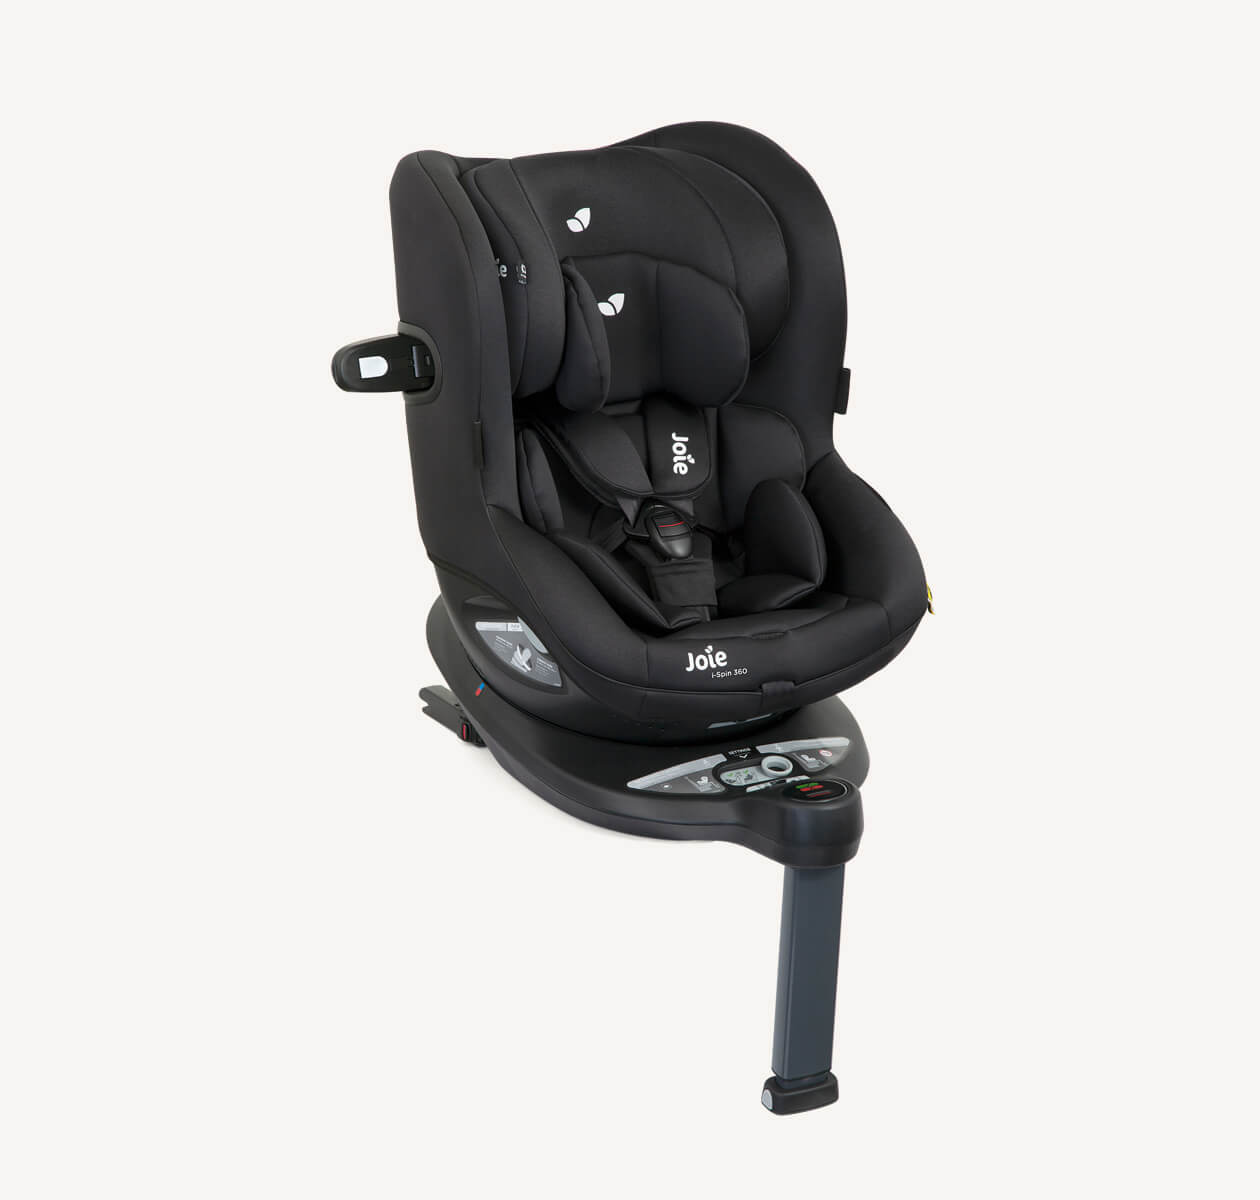 Joie i-spin 360 spinning baby car seat| spinning, 360